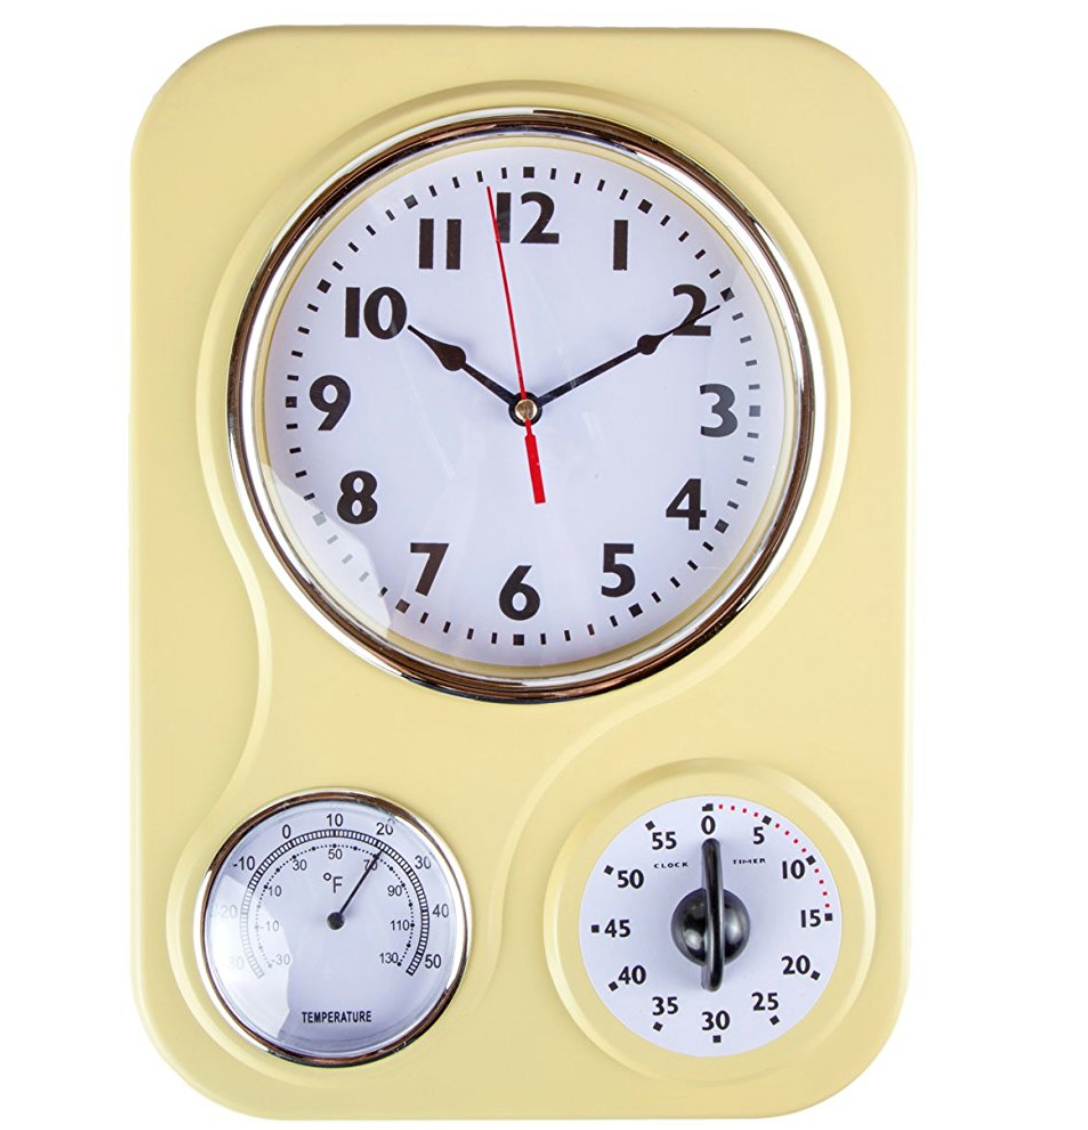 Retro Kitchen Clock With Temperature and Timer. By Lily's Home